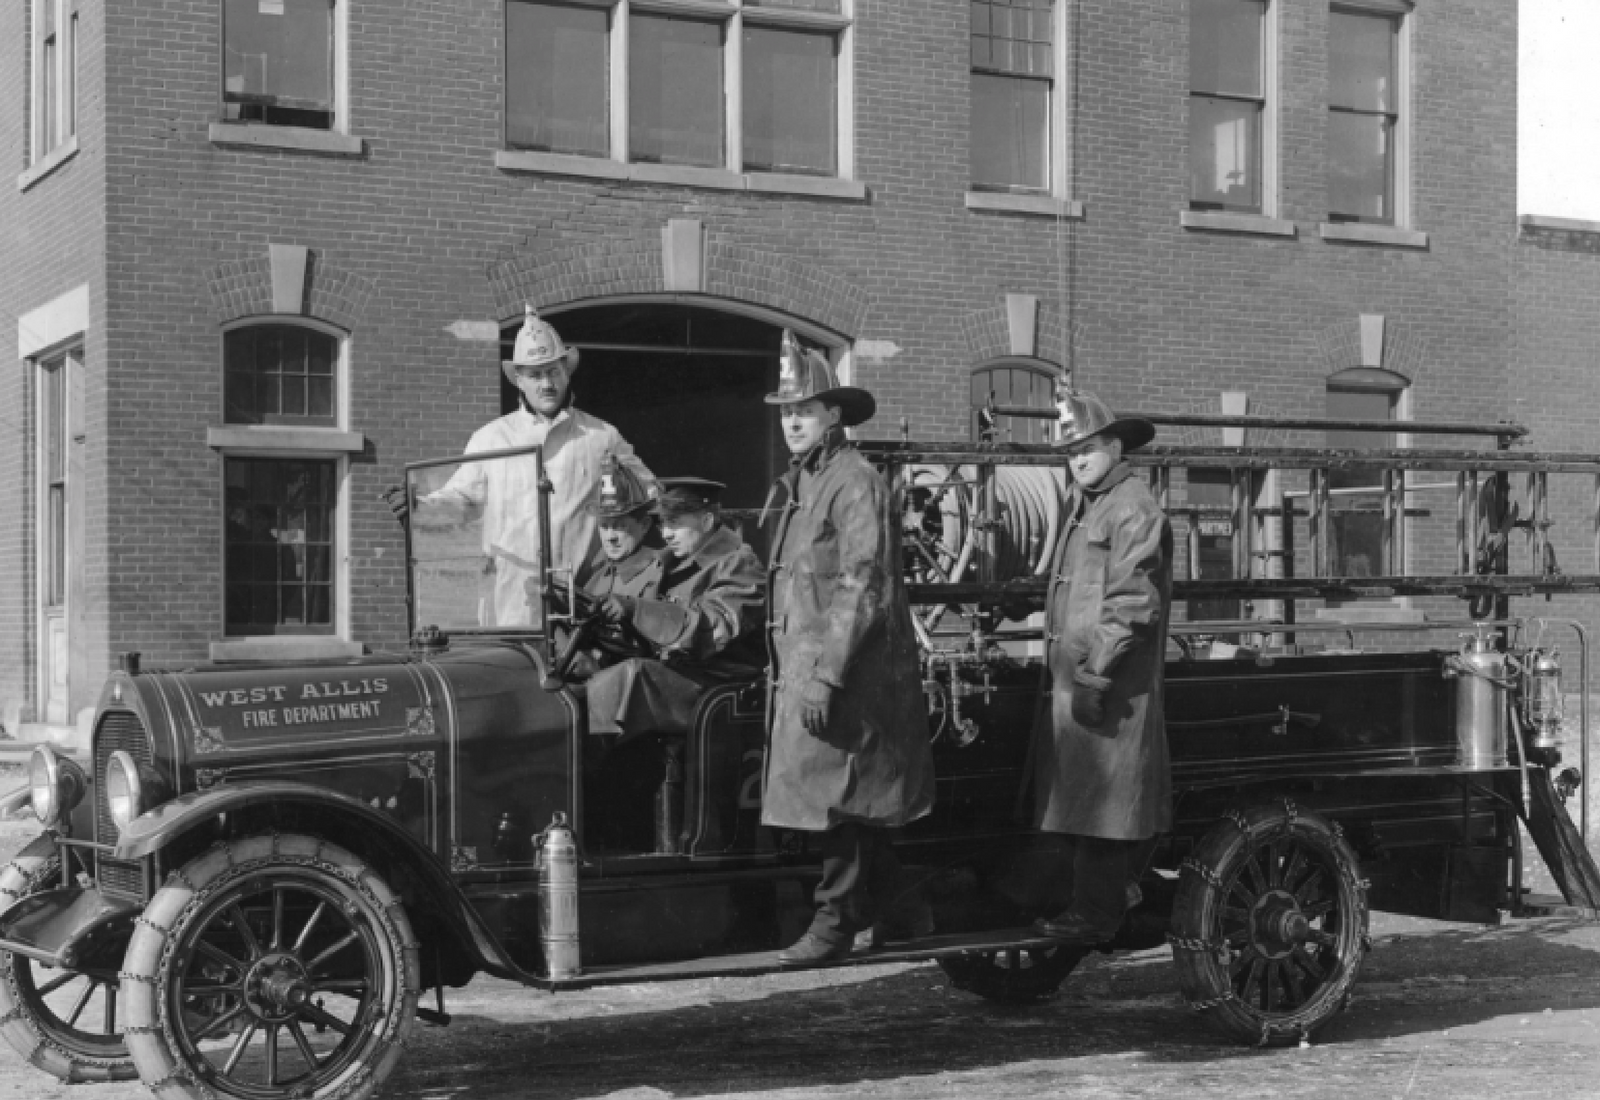 photo of west allis fire department in the early 1900s